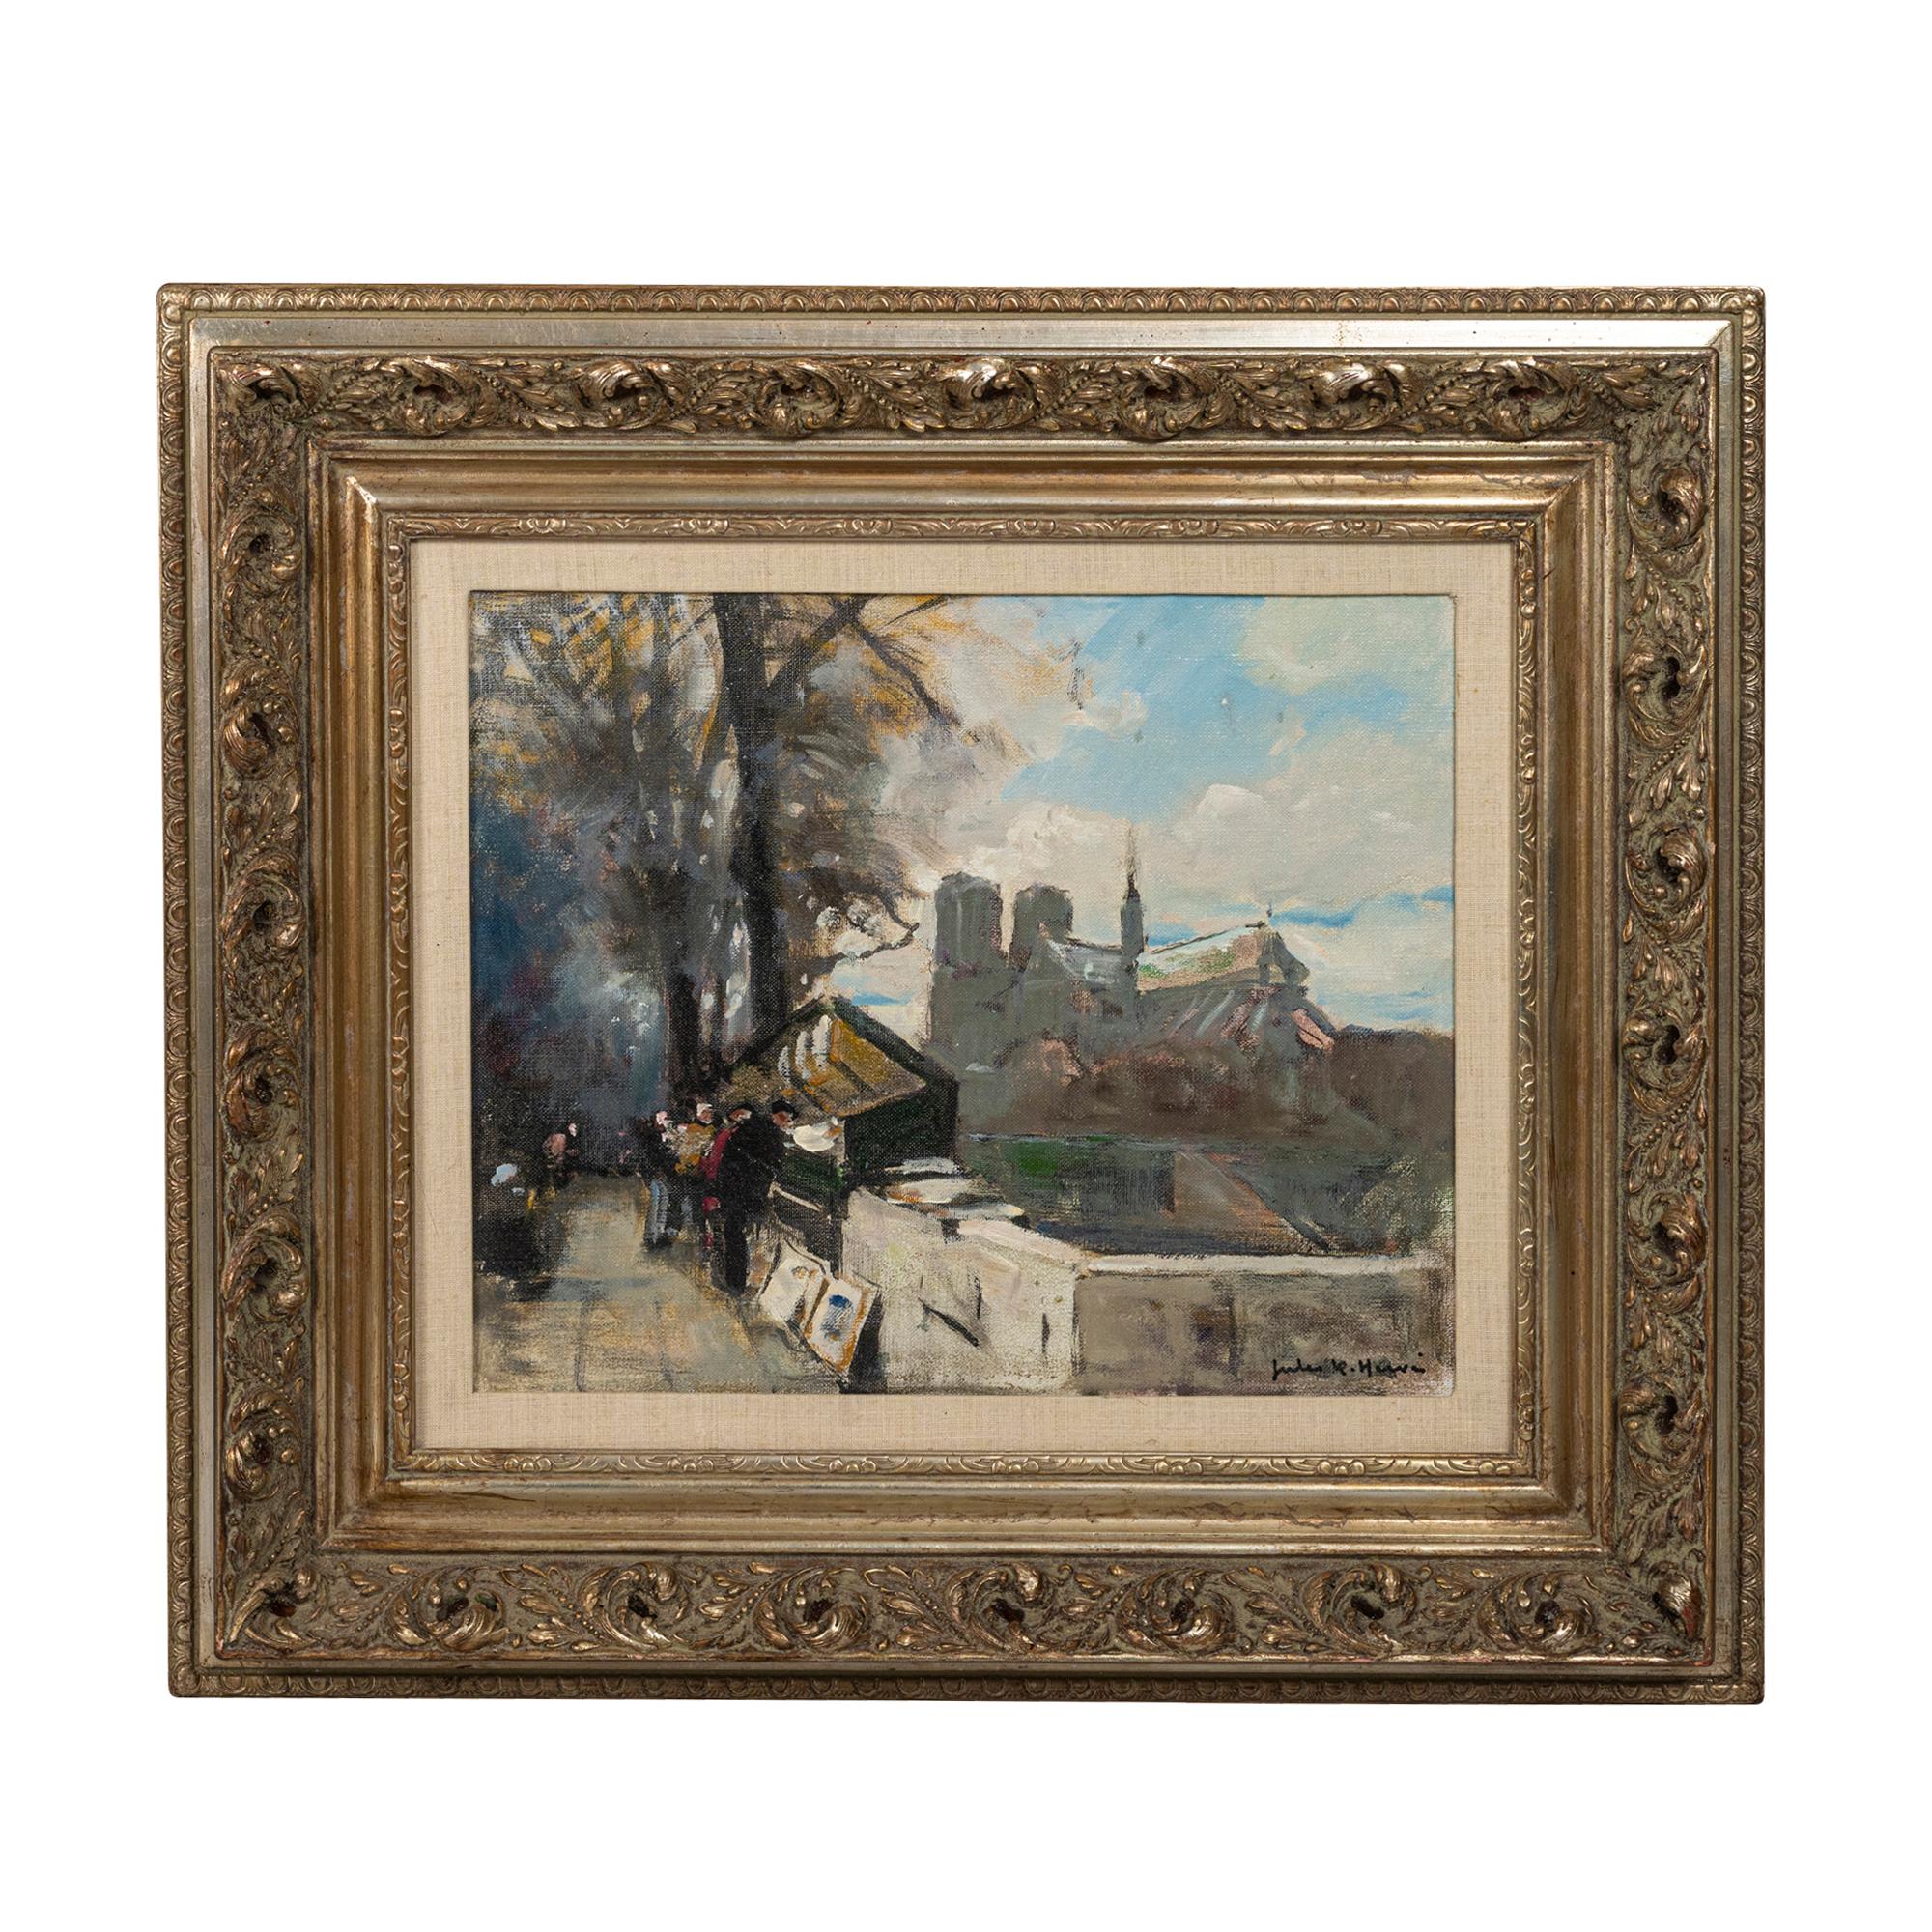 Jules René Hervé (1887-1981),
French
Bookstalls
signed
Jules R. Hervé (lower right)
Signed verso Jules R. Herve
Oil on canvas
Provenance: W.F. Burger Co,
Measures: 18 1/2 by 12 1/2 in.
47 by 31.7 cm
size with frame
25 by 22 in.
   